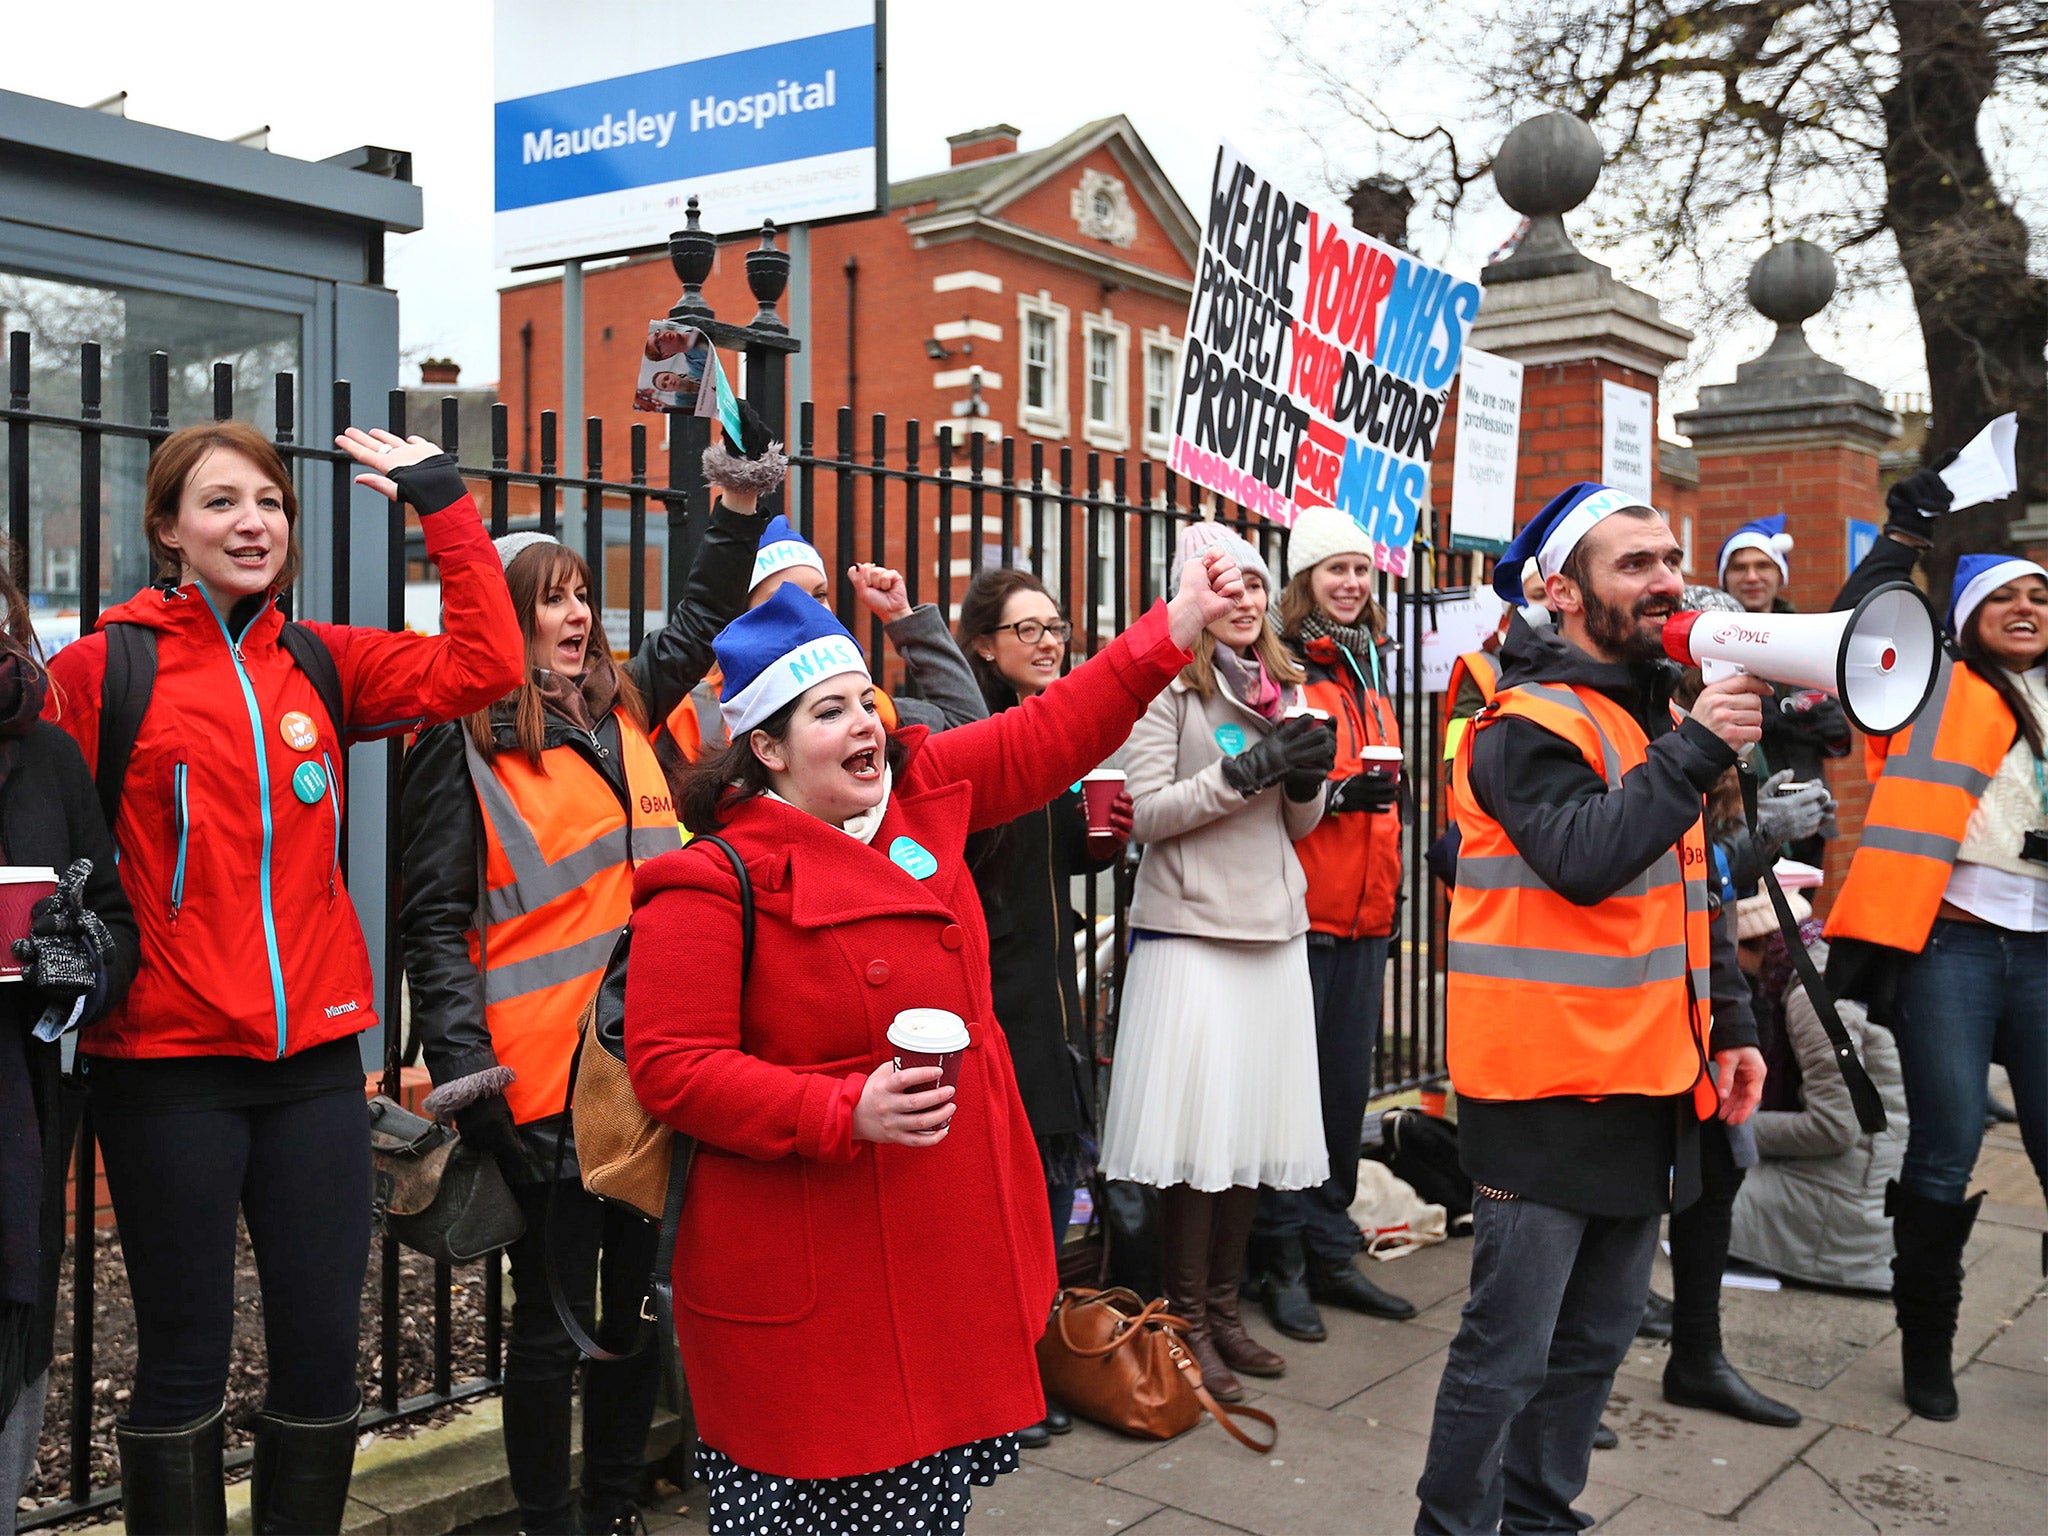 Junior doctors and staff members picket outside Maudsley Hospital